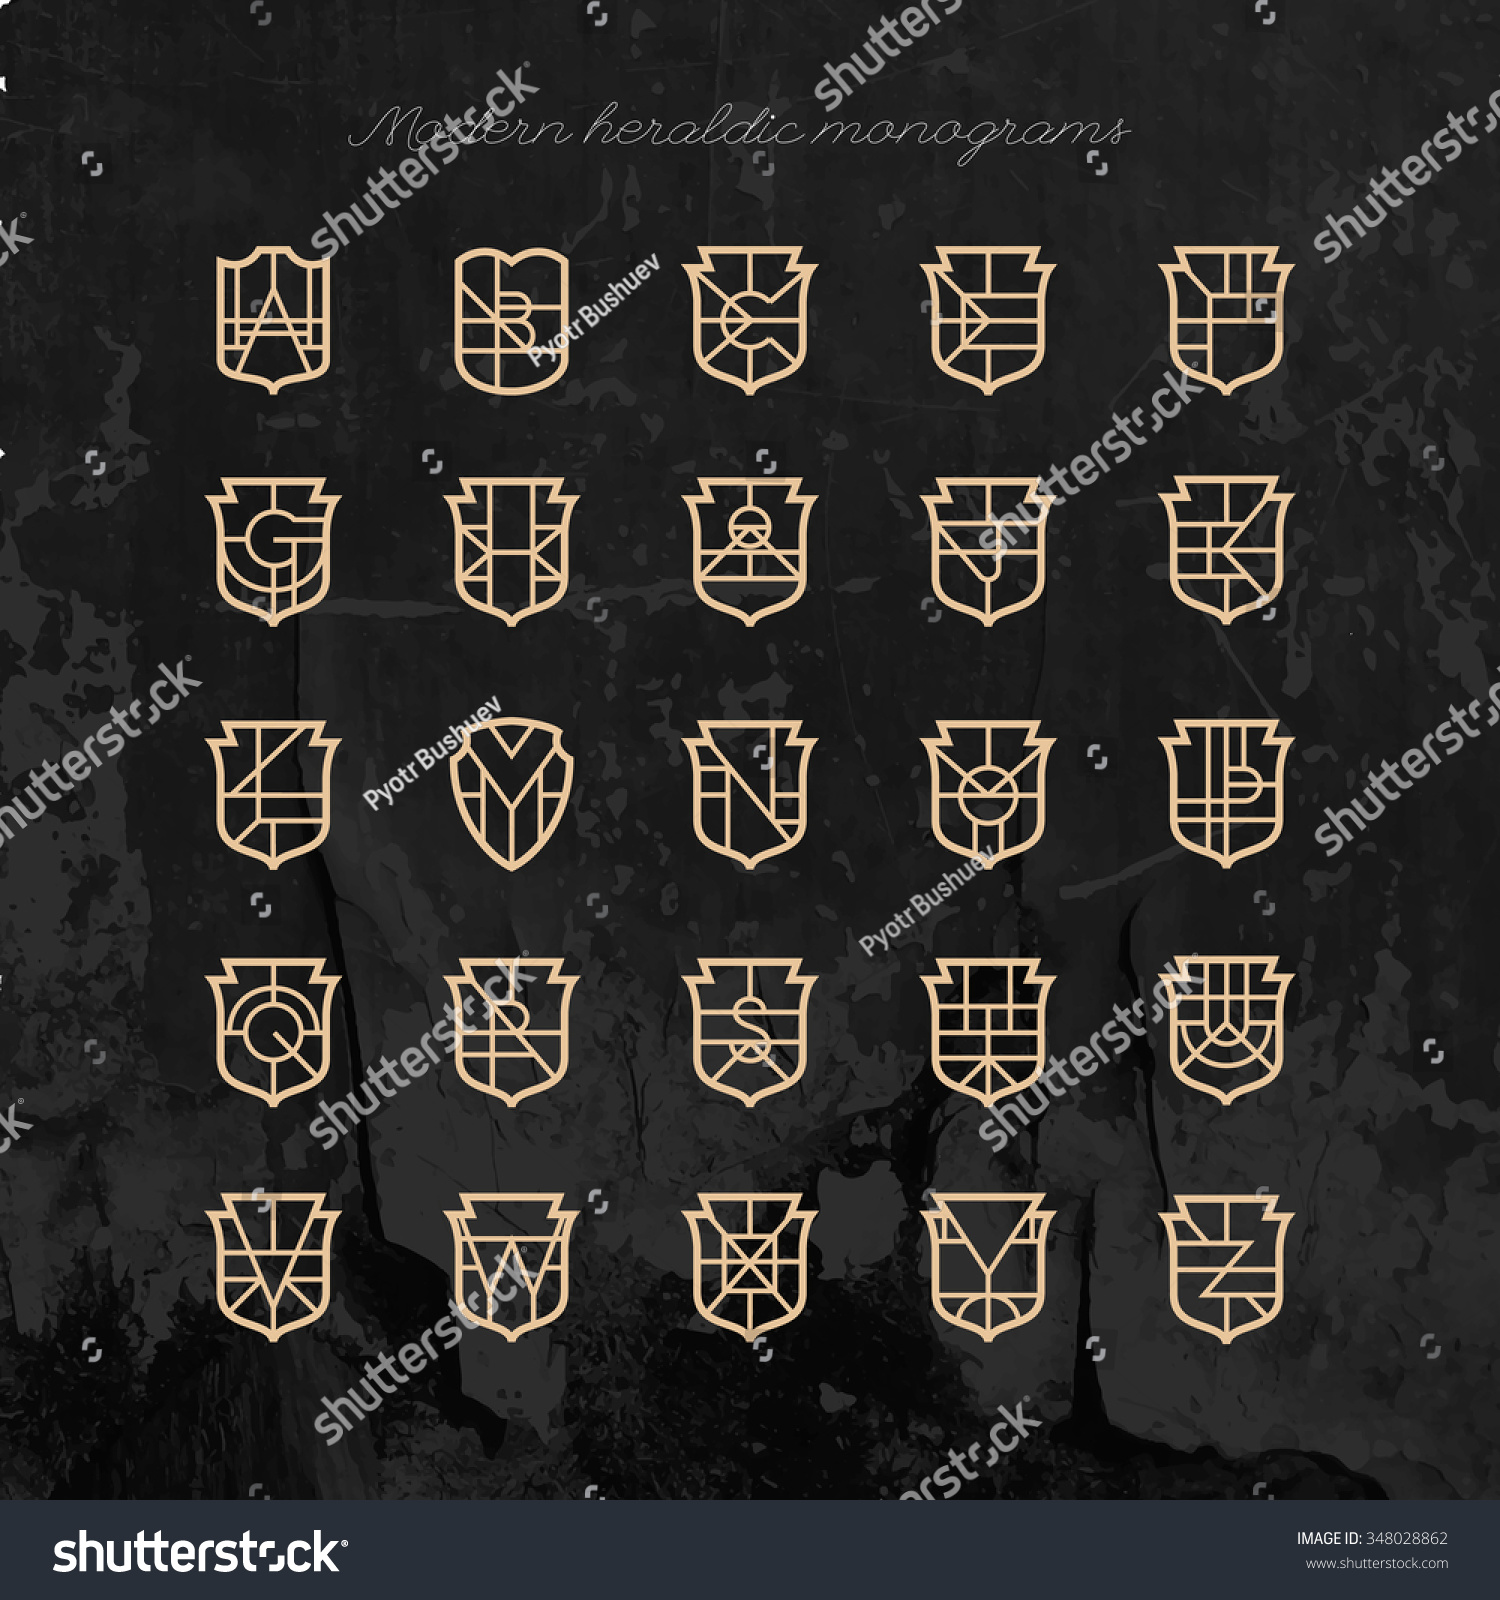 SVG of Set of vector shield shape monograms. Collection of modern heraldic logos. High quality design elements. svg